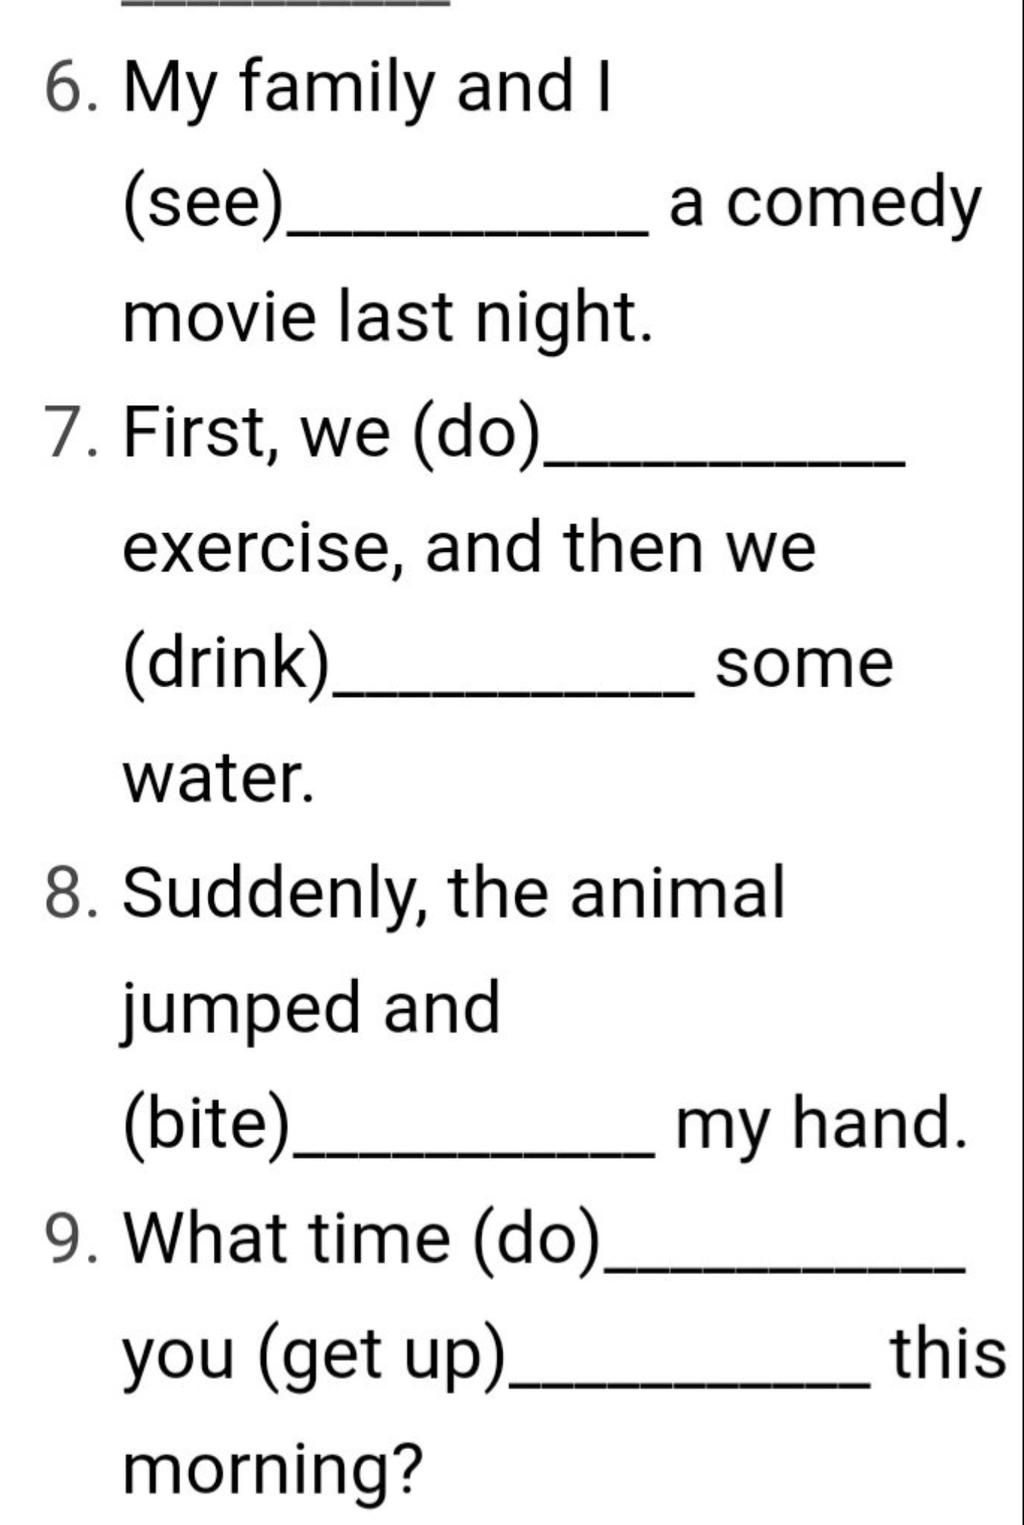 6. My family and I (see)_ a comedy movie last night. 7. First, we (do)_  exercise, and then we (drink) some water. 8. Suddenly, the animal jumped  and (bite)